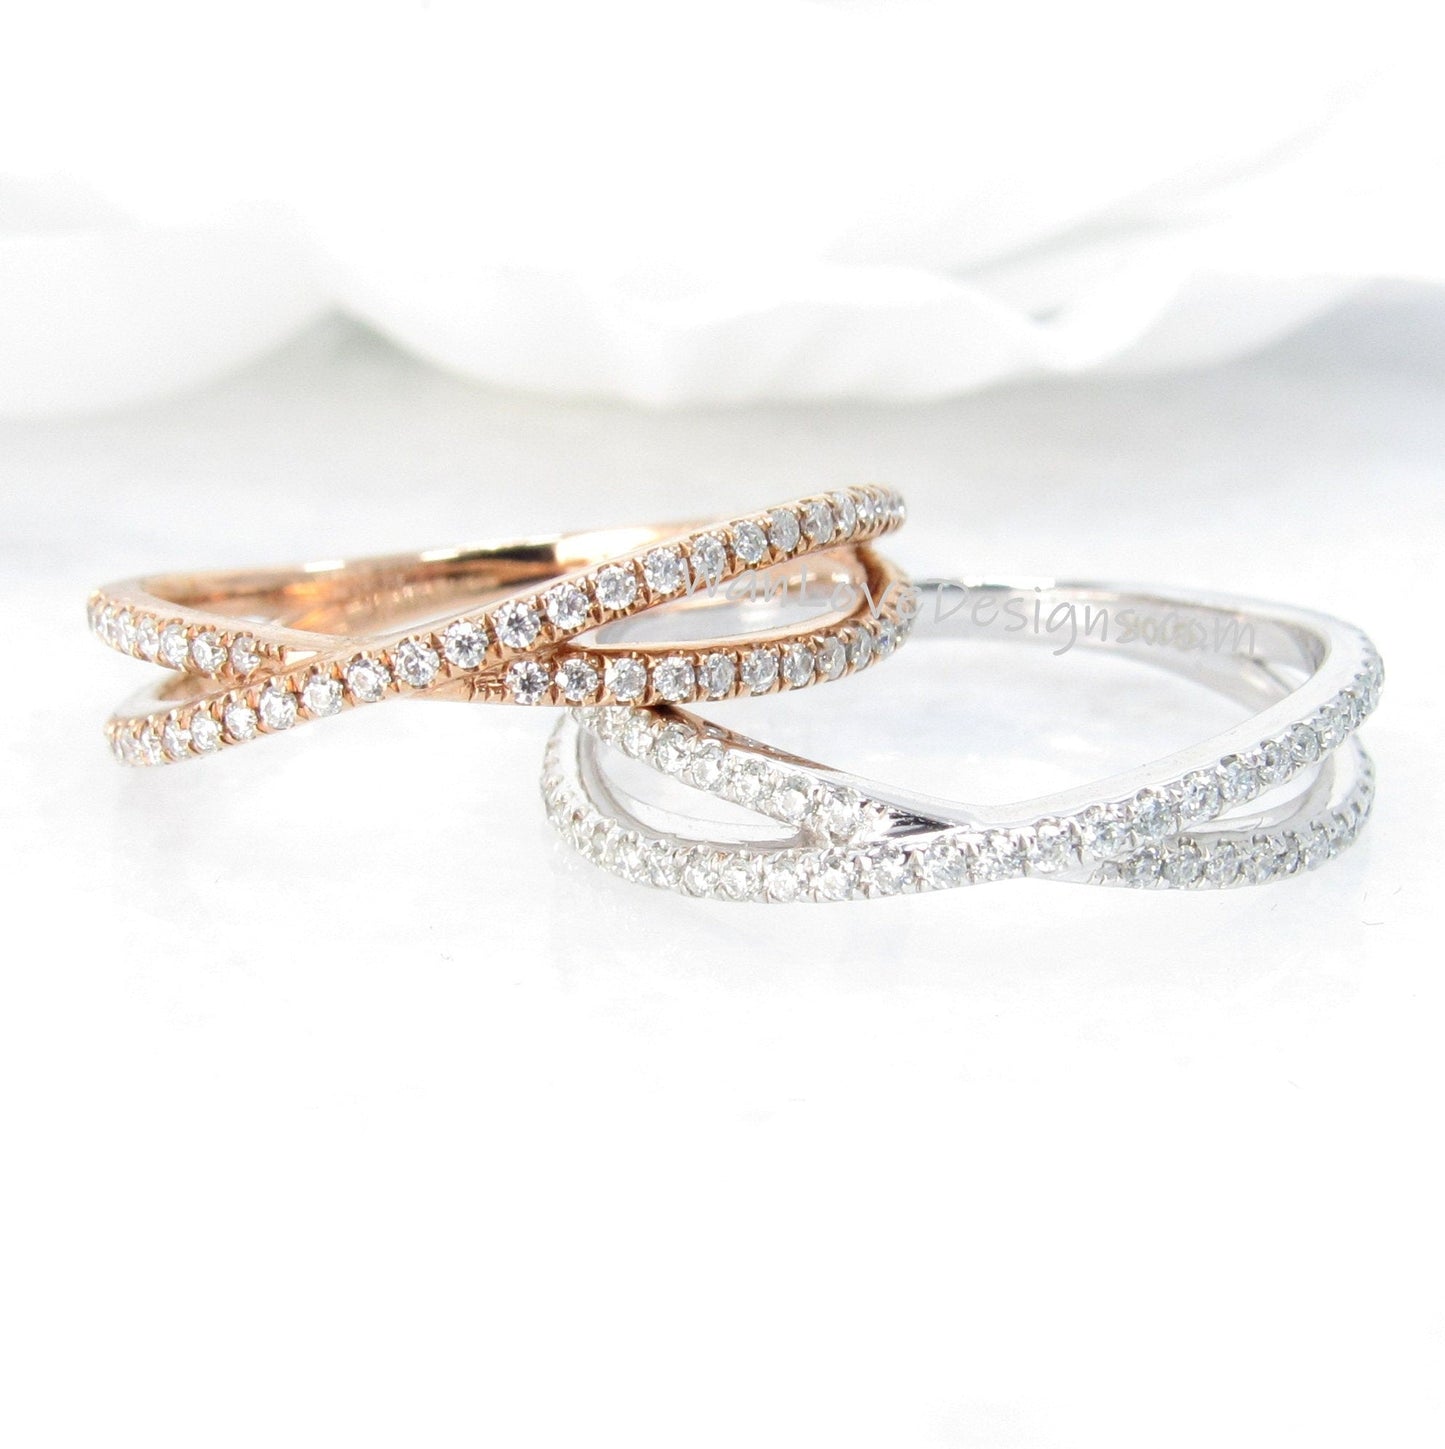 Pave X Ring • Criss Cross Diamond Ring • Almost Eternity Ring • Minimalist Jewelry • Double Band Ring • Gift for Her Wan Love Designs